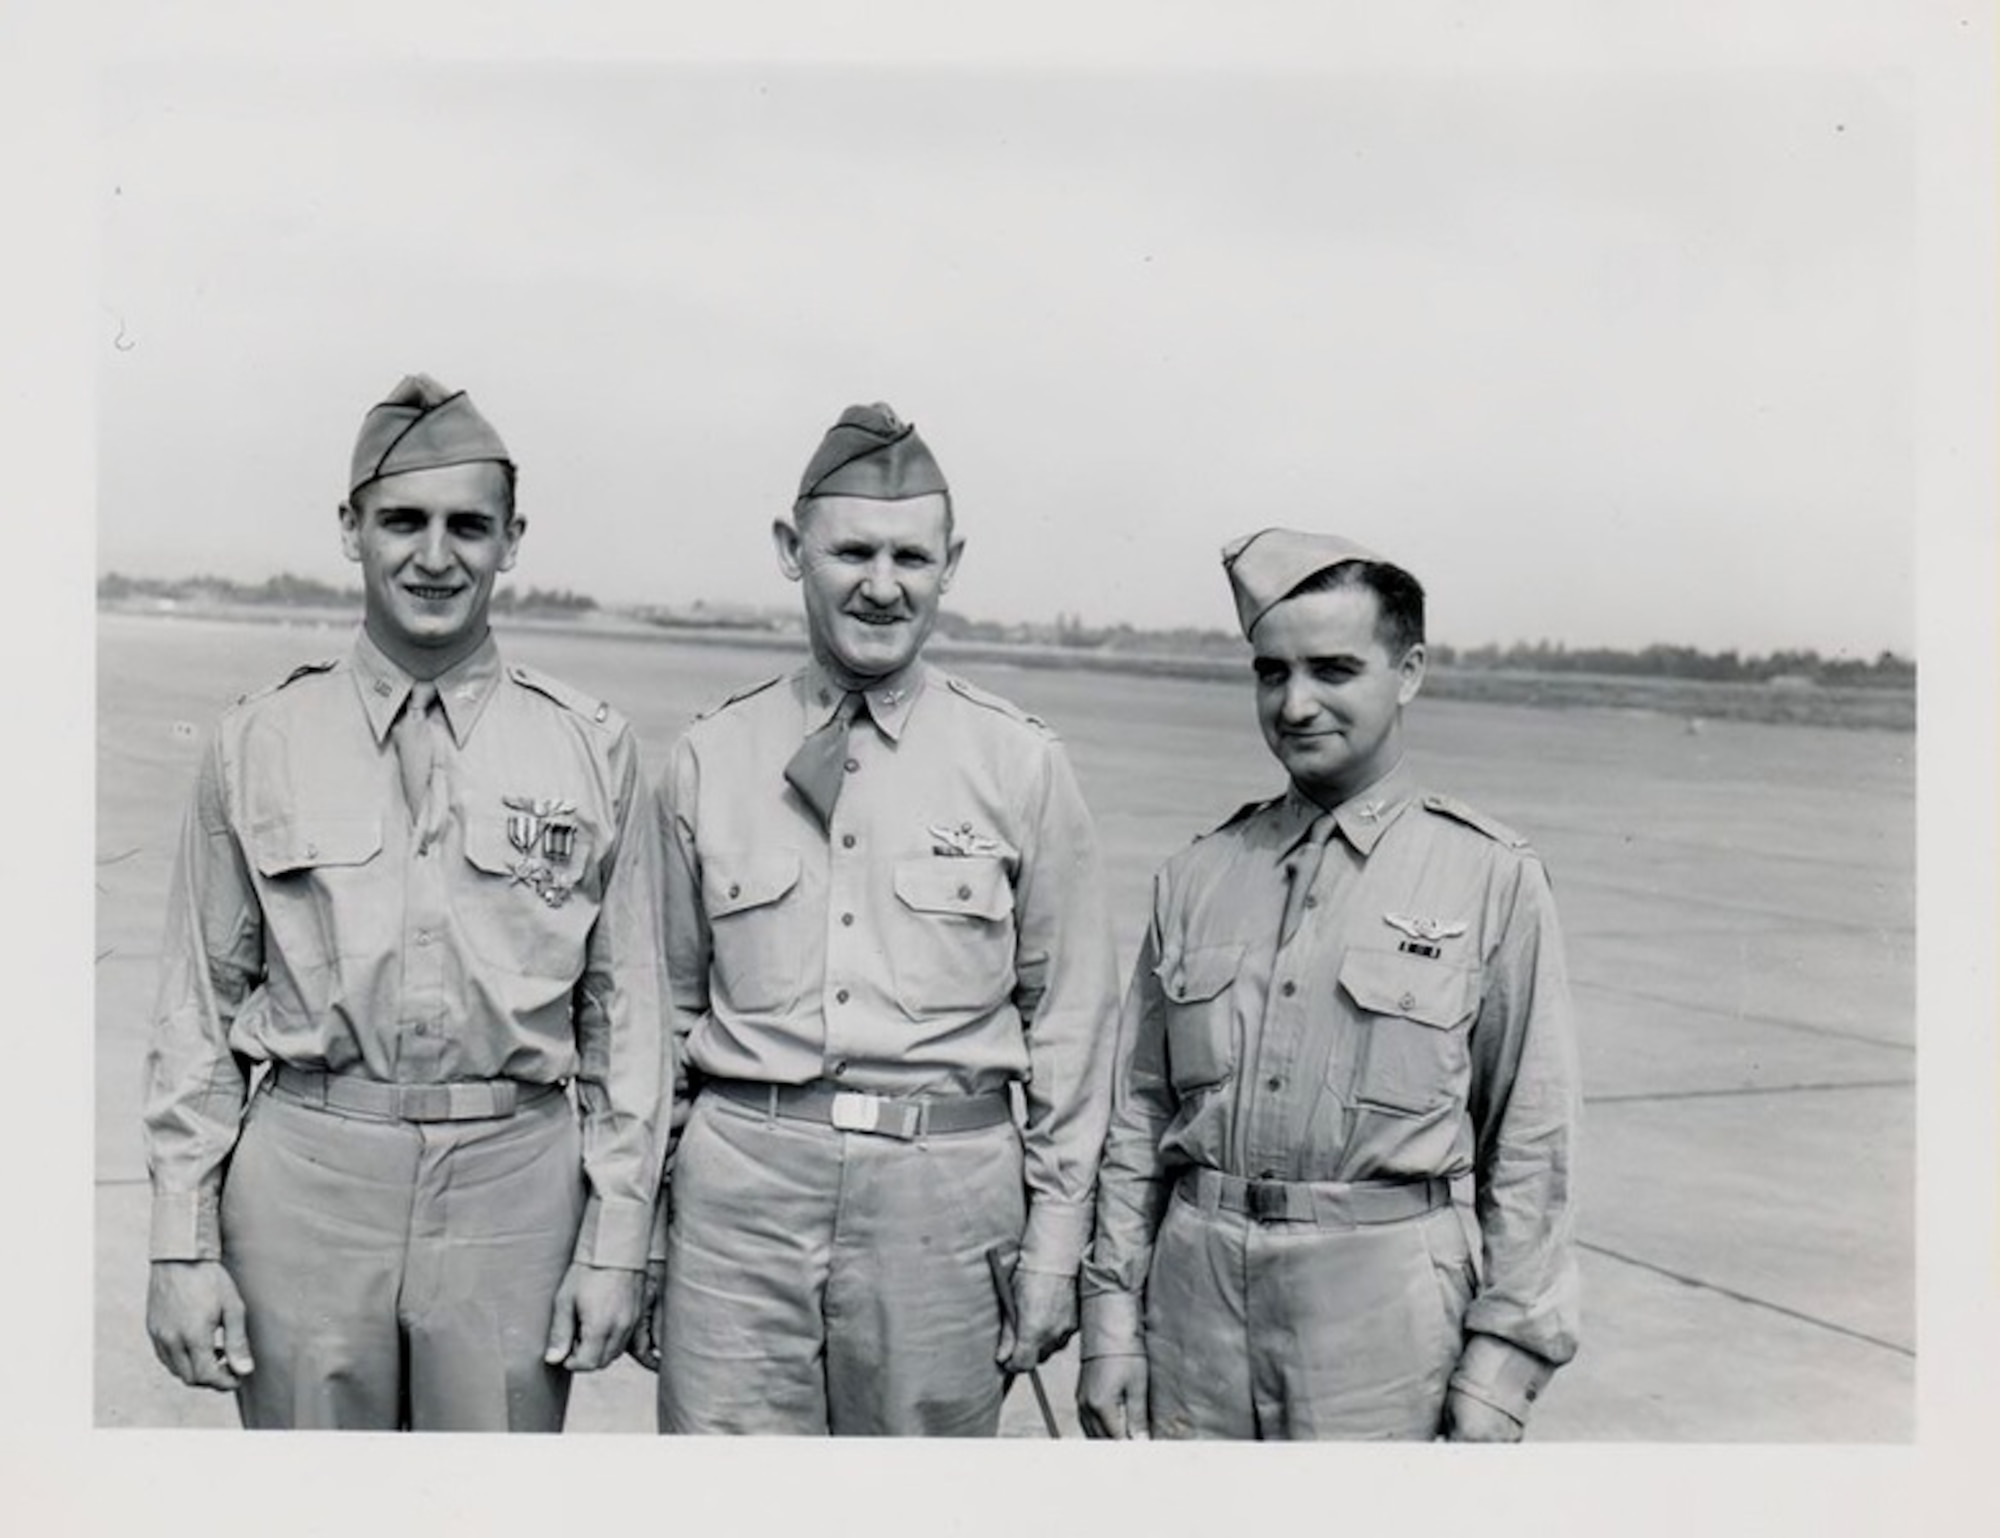 Two Oregon-members of Crew 7 returned home in the summer of 1942 on leave.  Pictured here at Portland Army Air Base, Oregon, left to right are Lt. Dean Davenport, Col. Joseph L. Stromme, PAAB Commander and Lt. Robert S. Clever.  This photo was possibly taken on July 16, 1942, during the PAAB change of command and review of troops ceremony.  (Children of the Doolittle Raiders.com)